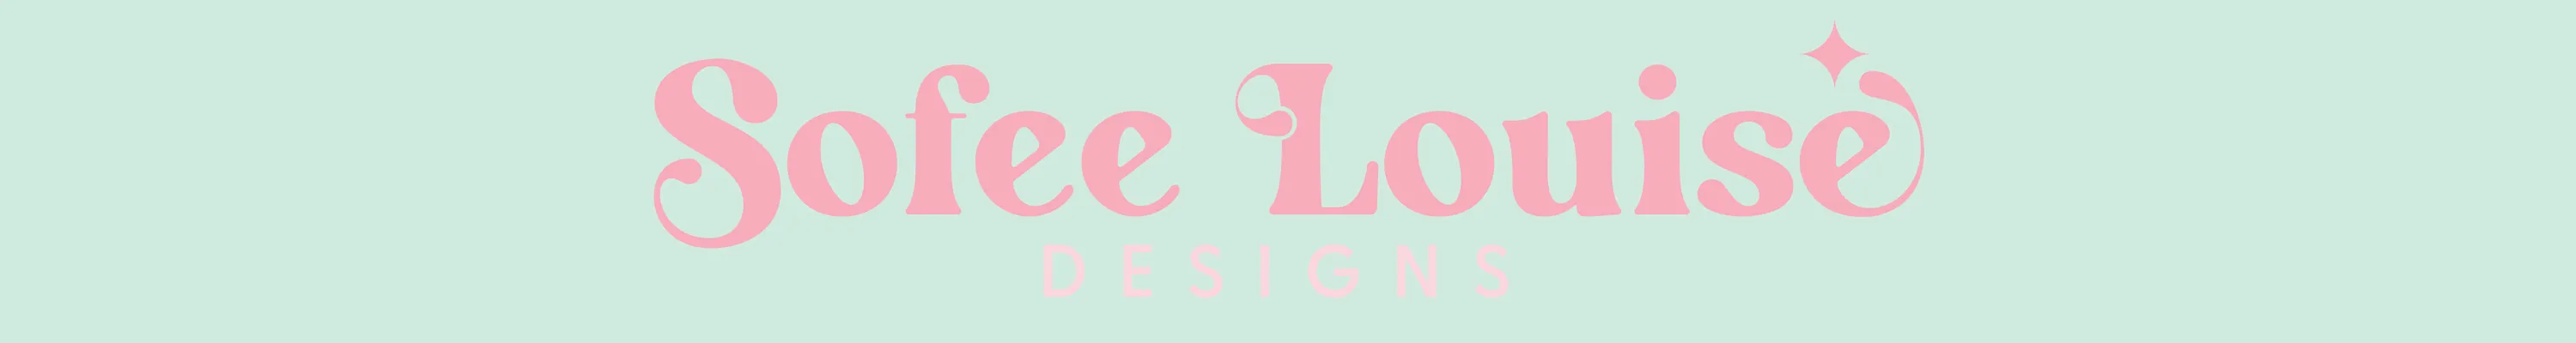 Sofee Louise Designs Banner